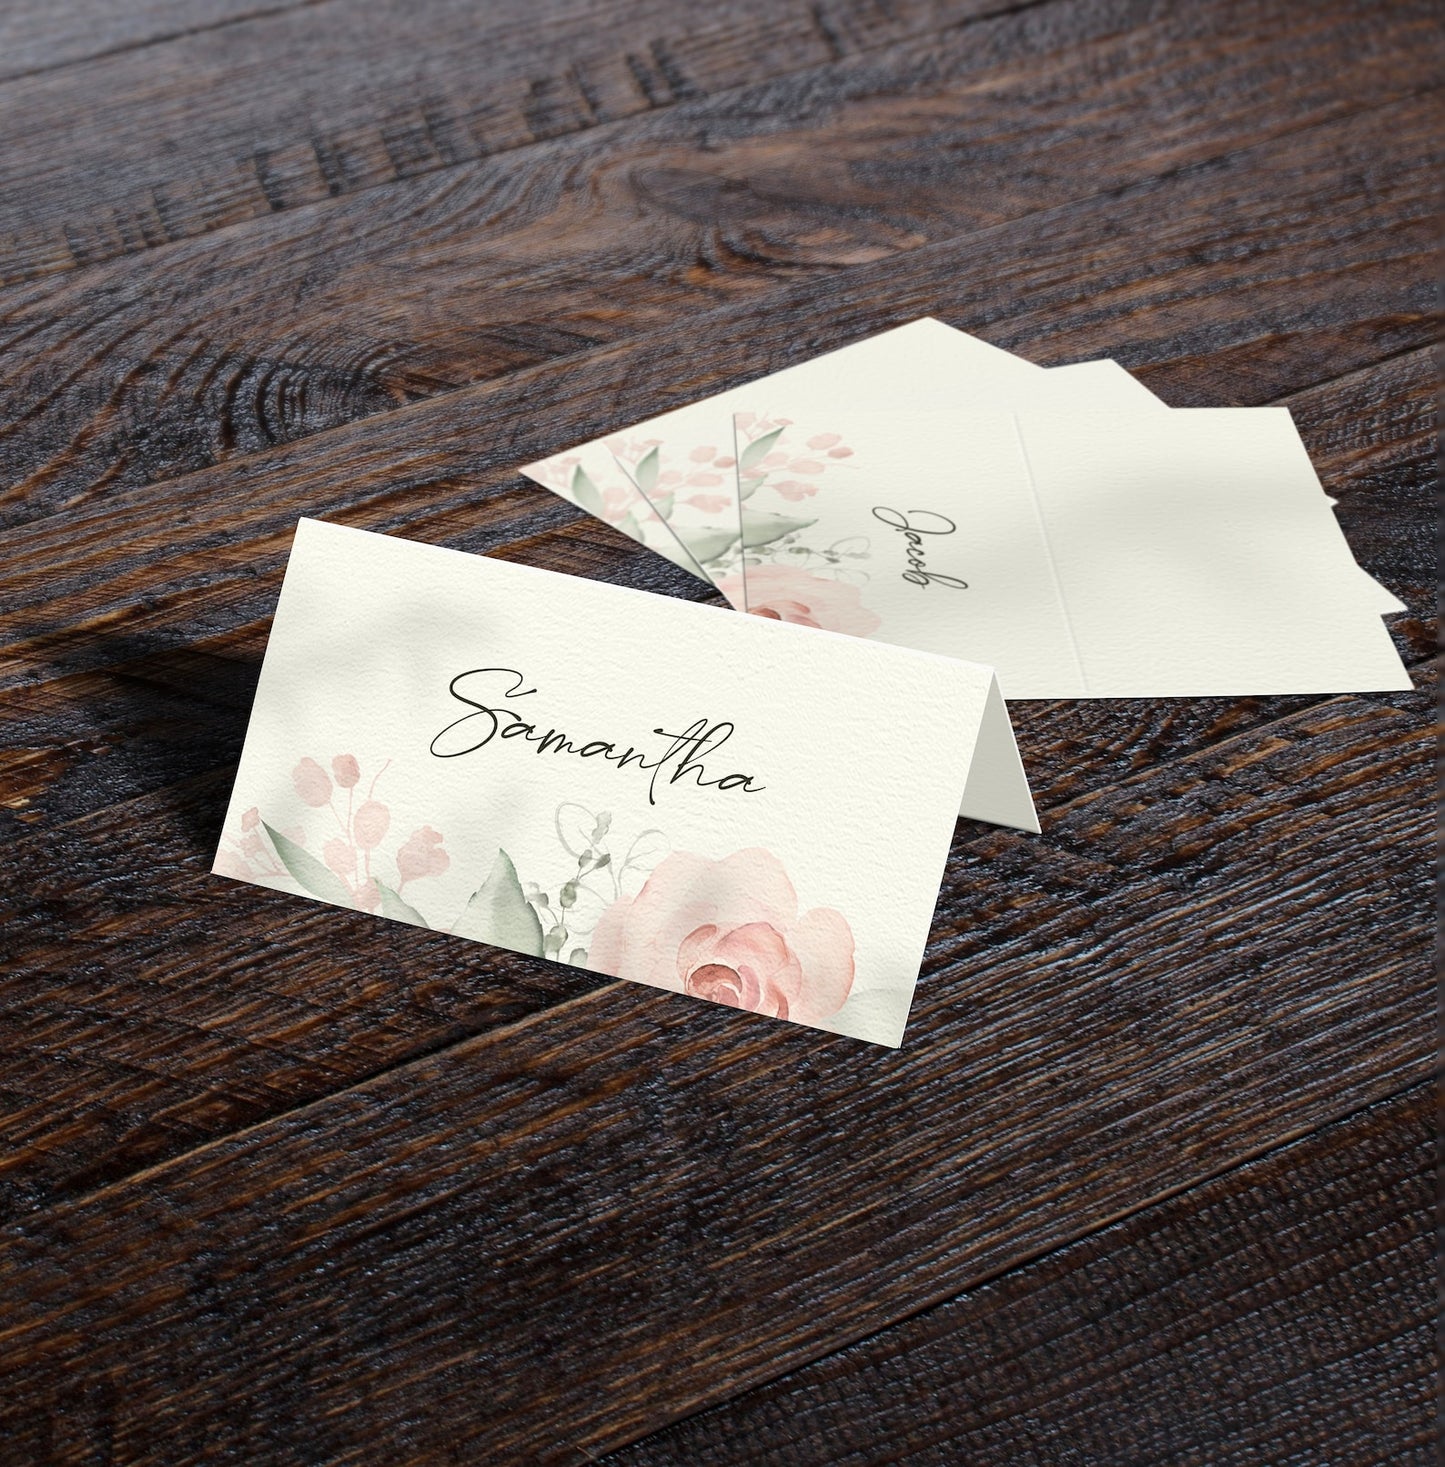 Folded Name Cards For Wedding